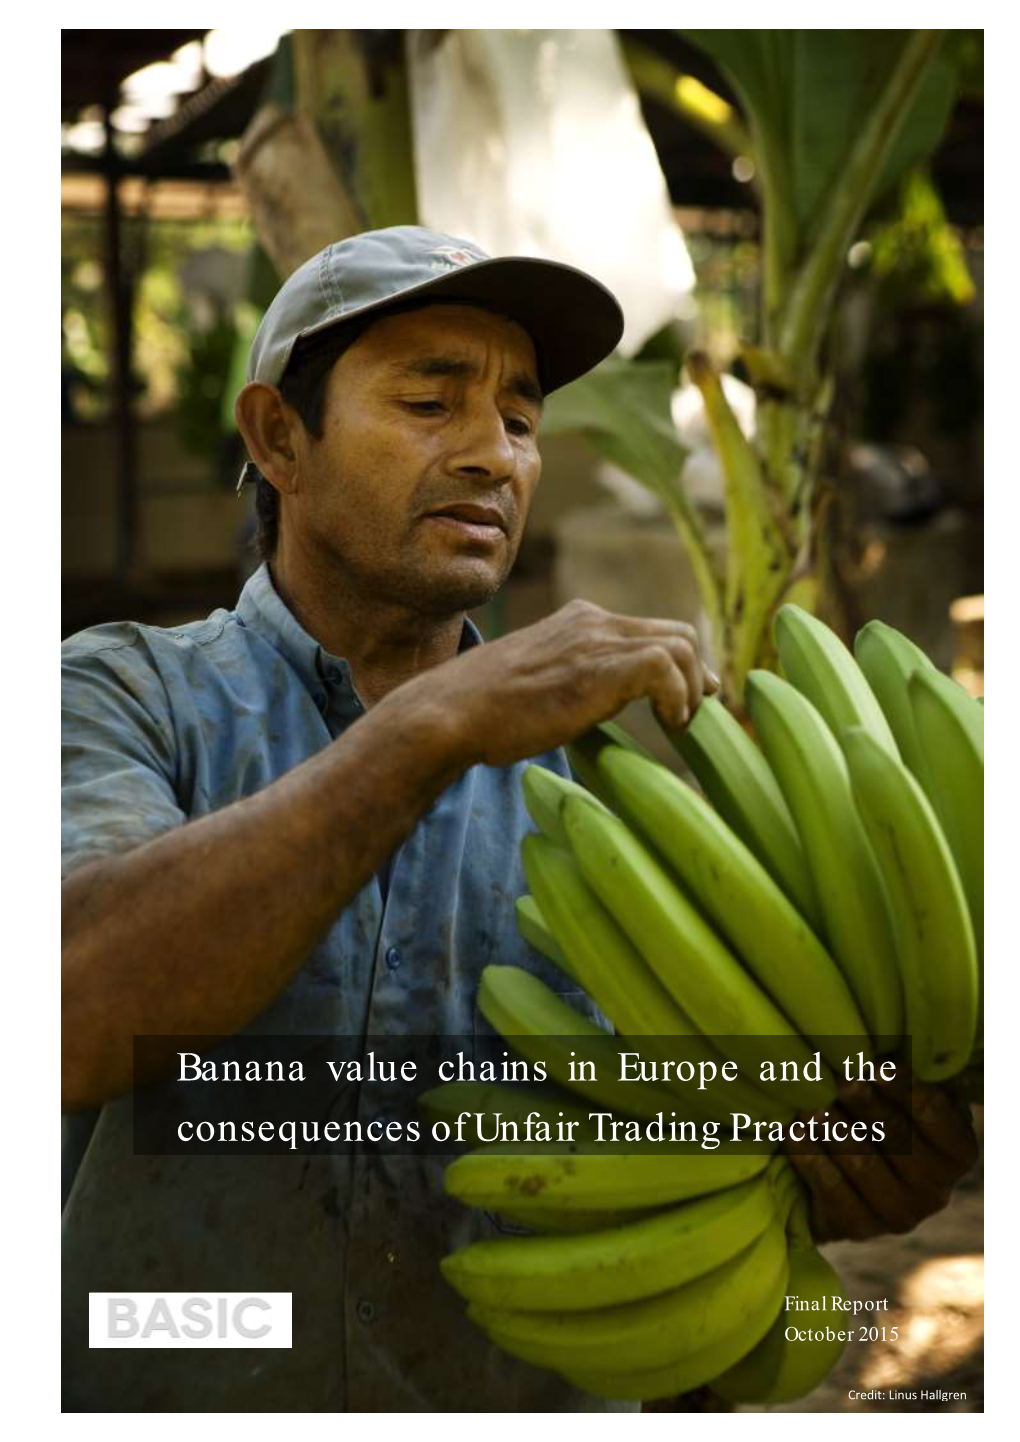 Banana Value Chains in Europe and the Consequences of Unfair Trading Practices